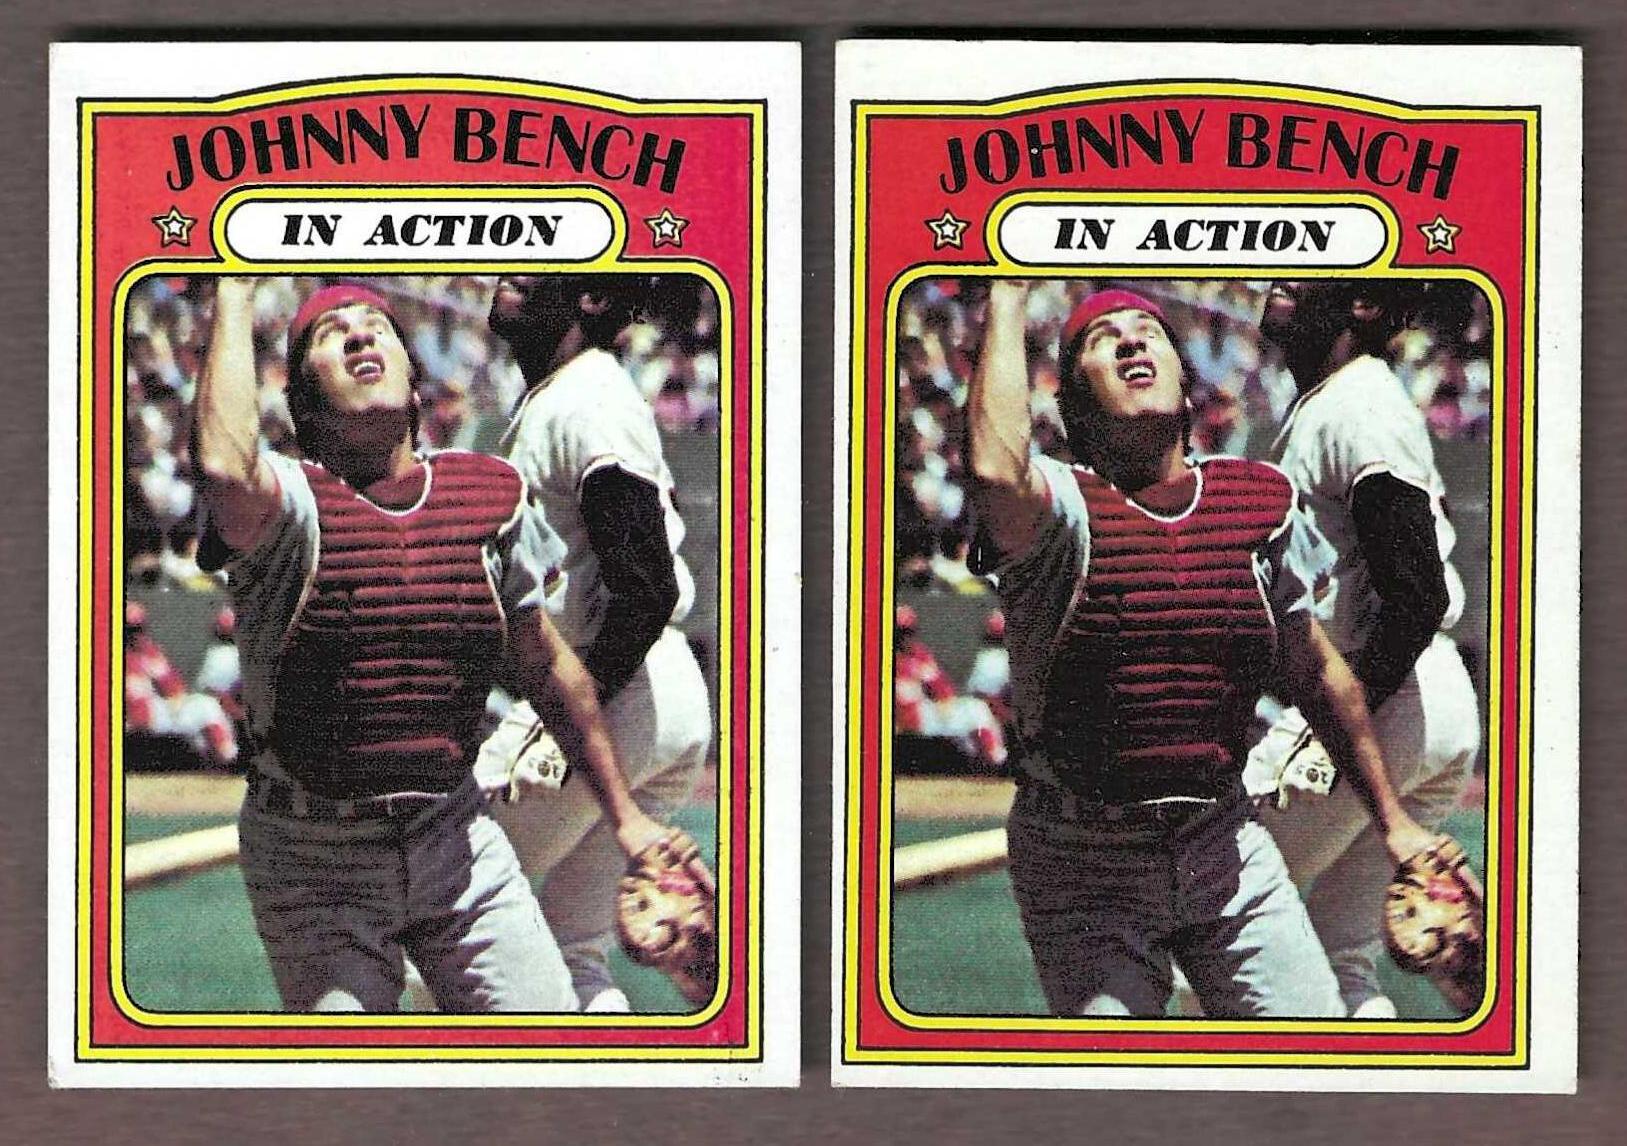 1972 Topps #434 Johnny Bench In-Action (Reds) Baseball cards value